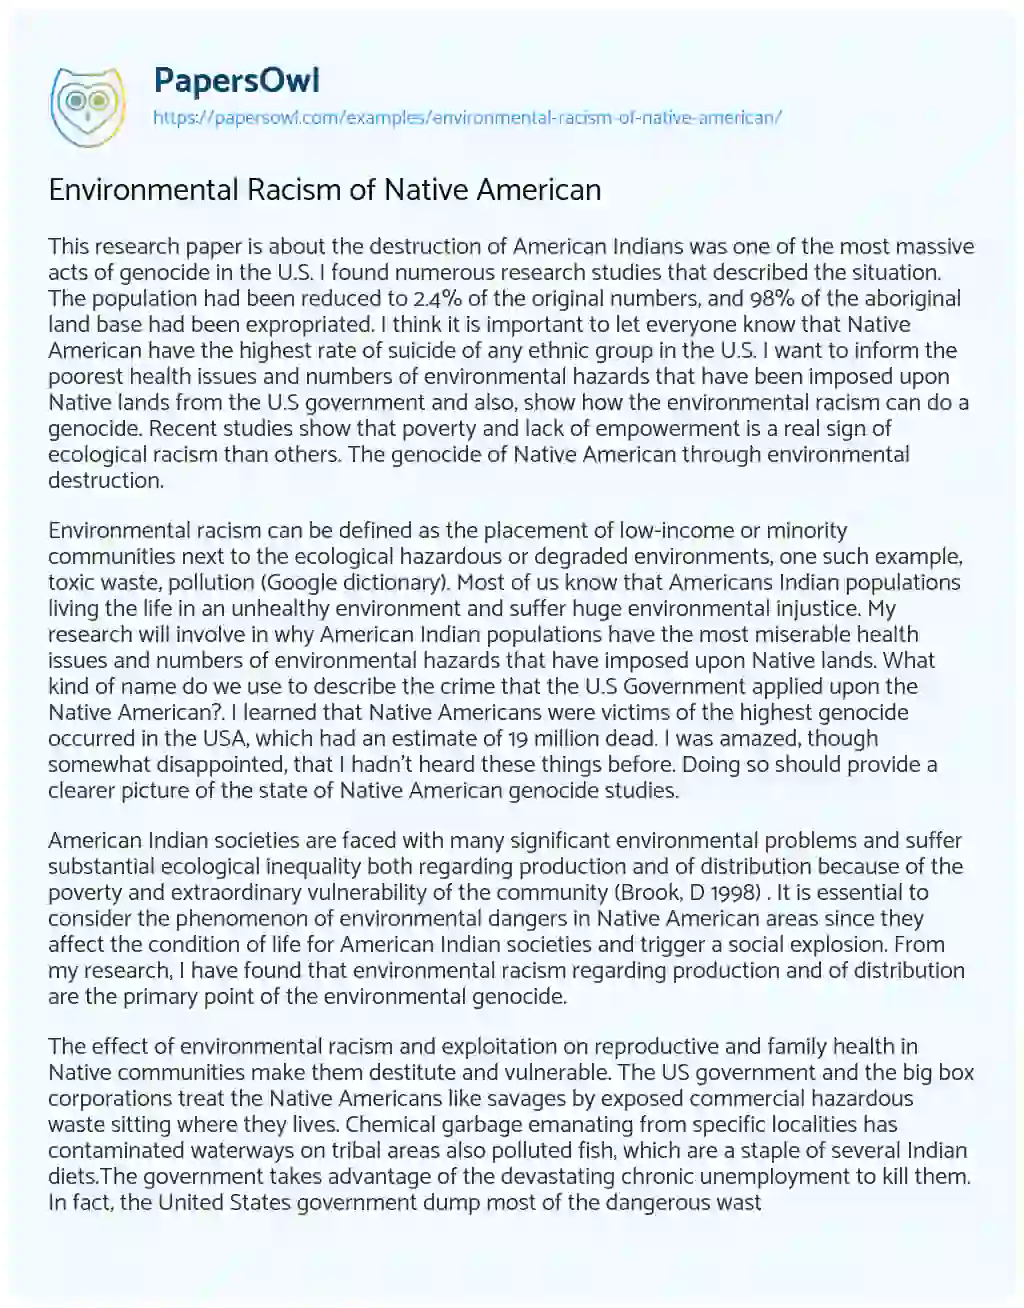 Essay on Environmental Racism of Native American